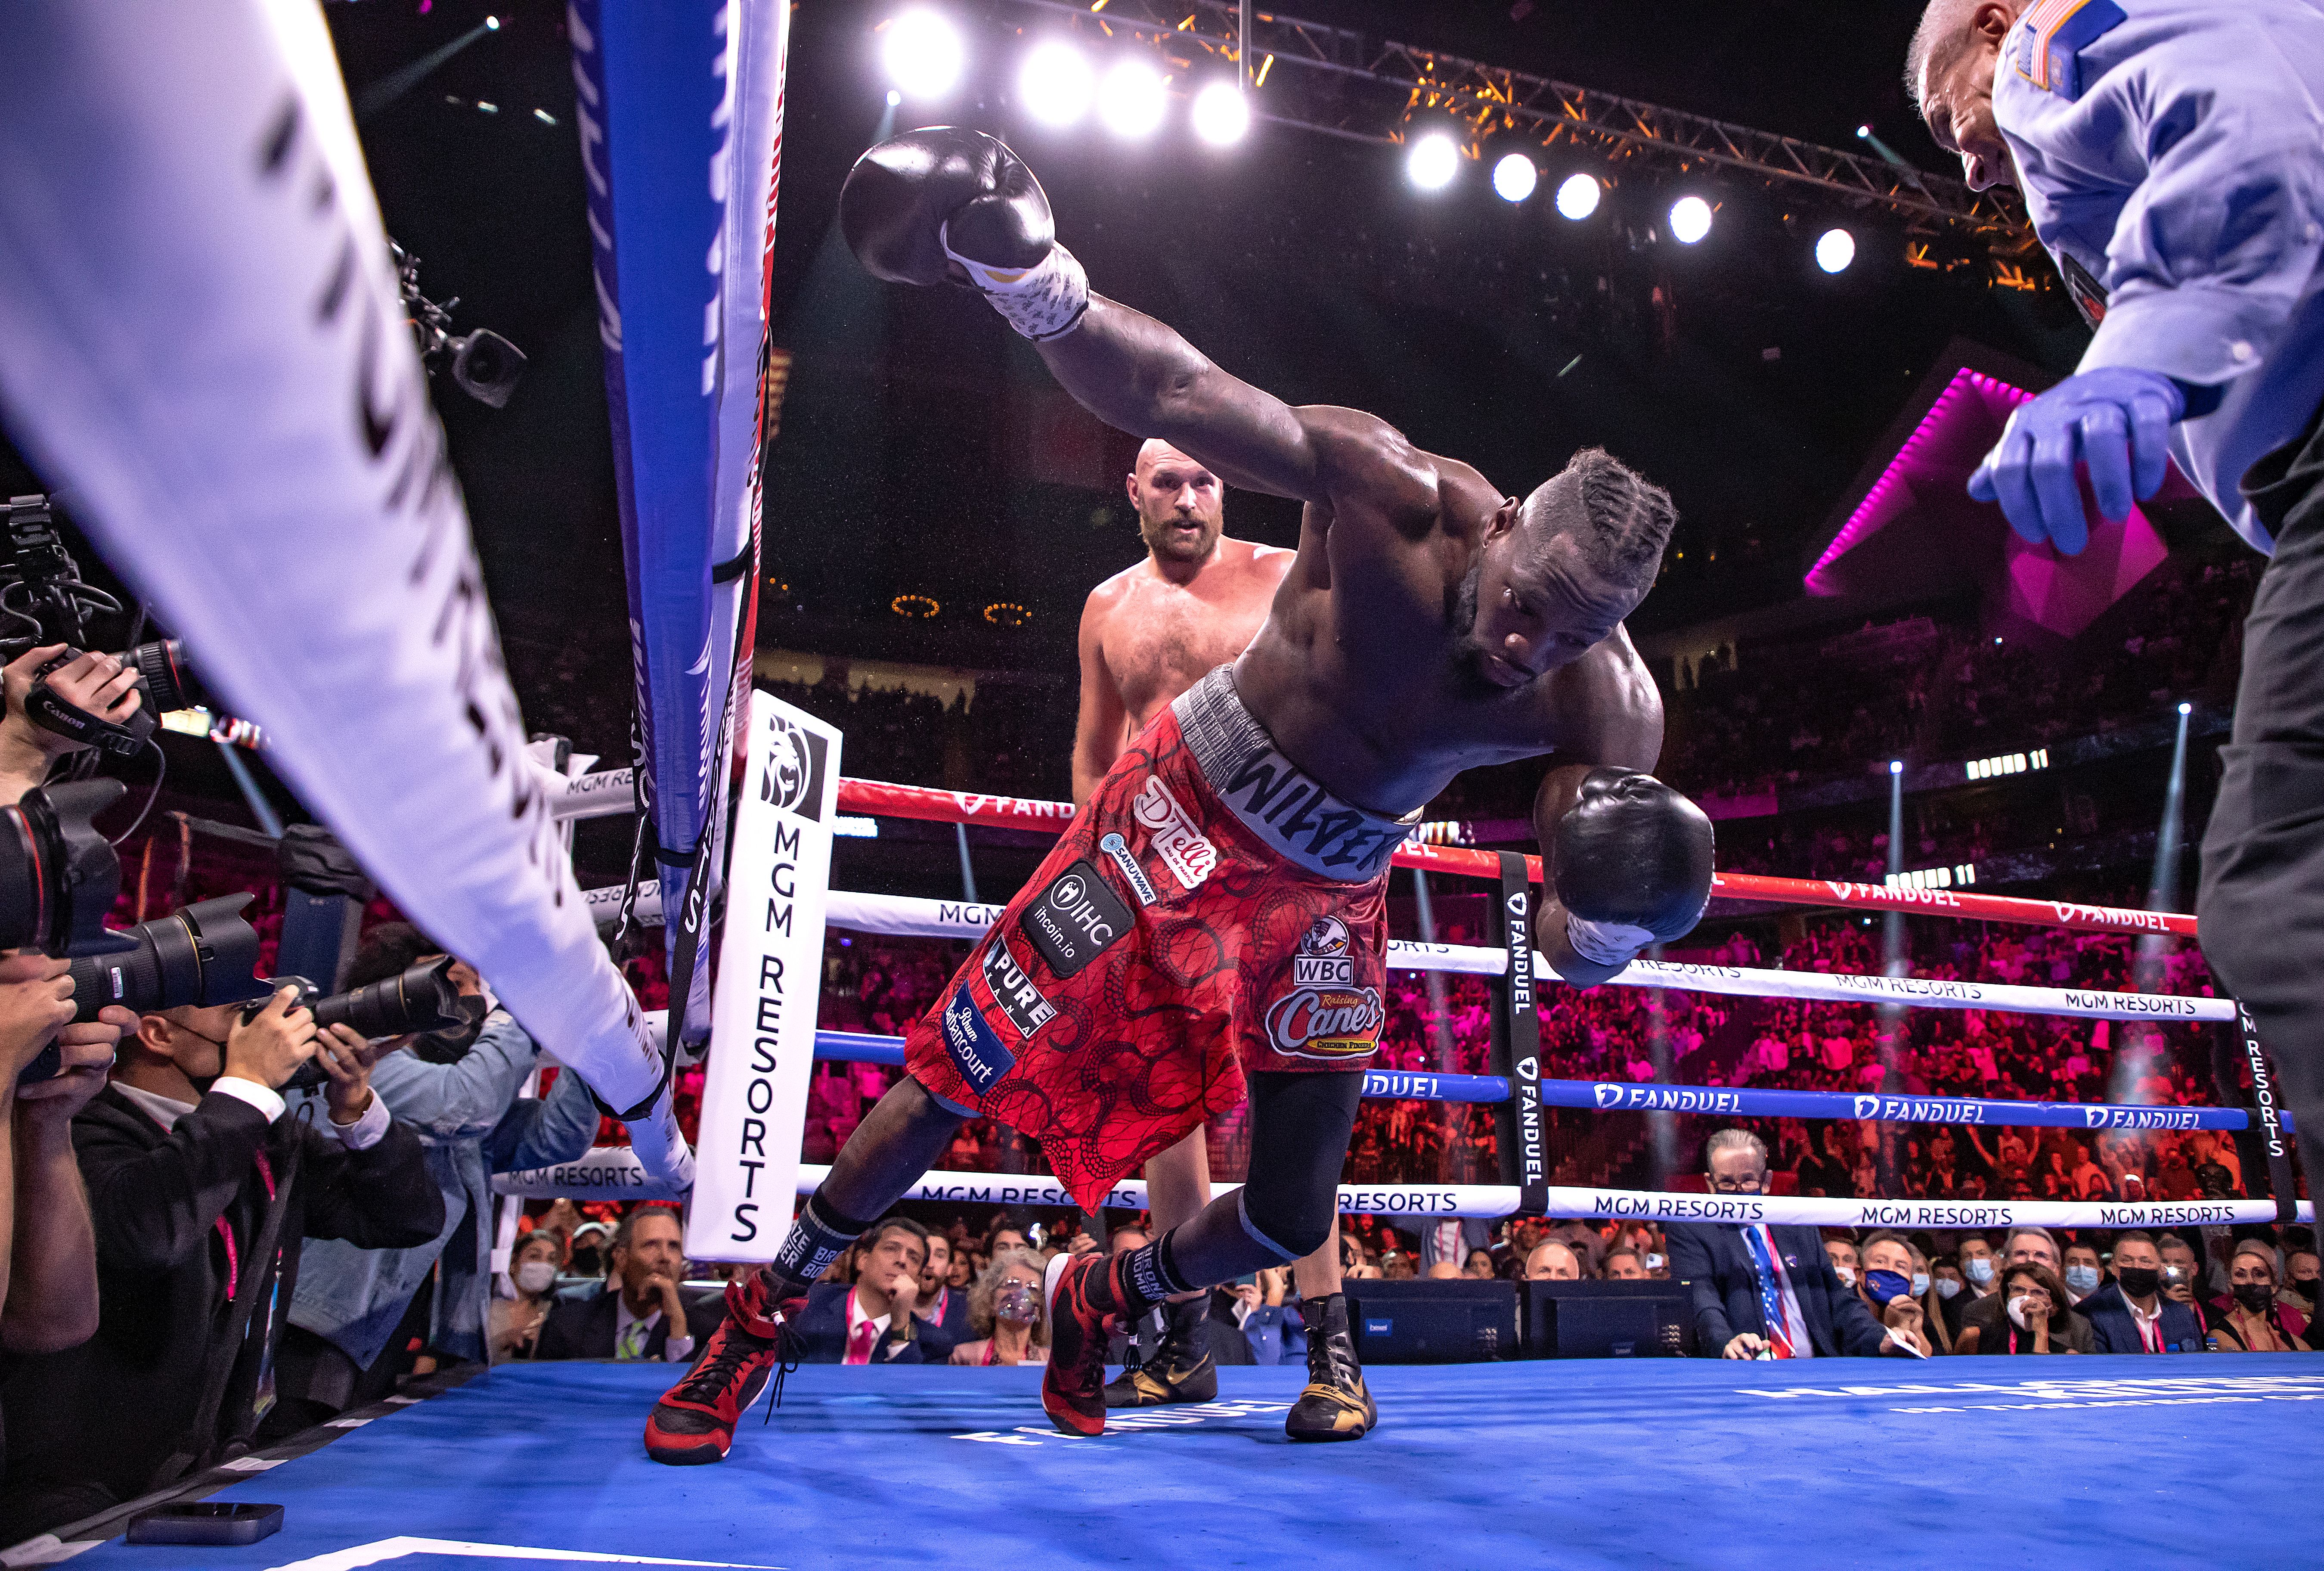 Deontay Wilder / Tyson Fury Return Fight Now Ordered By The WBC; If No Deal  Reached By Feb. 5th Fight Will Go To Purse Bid - Latest Boxing News